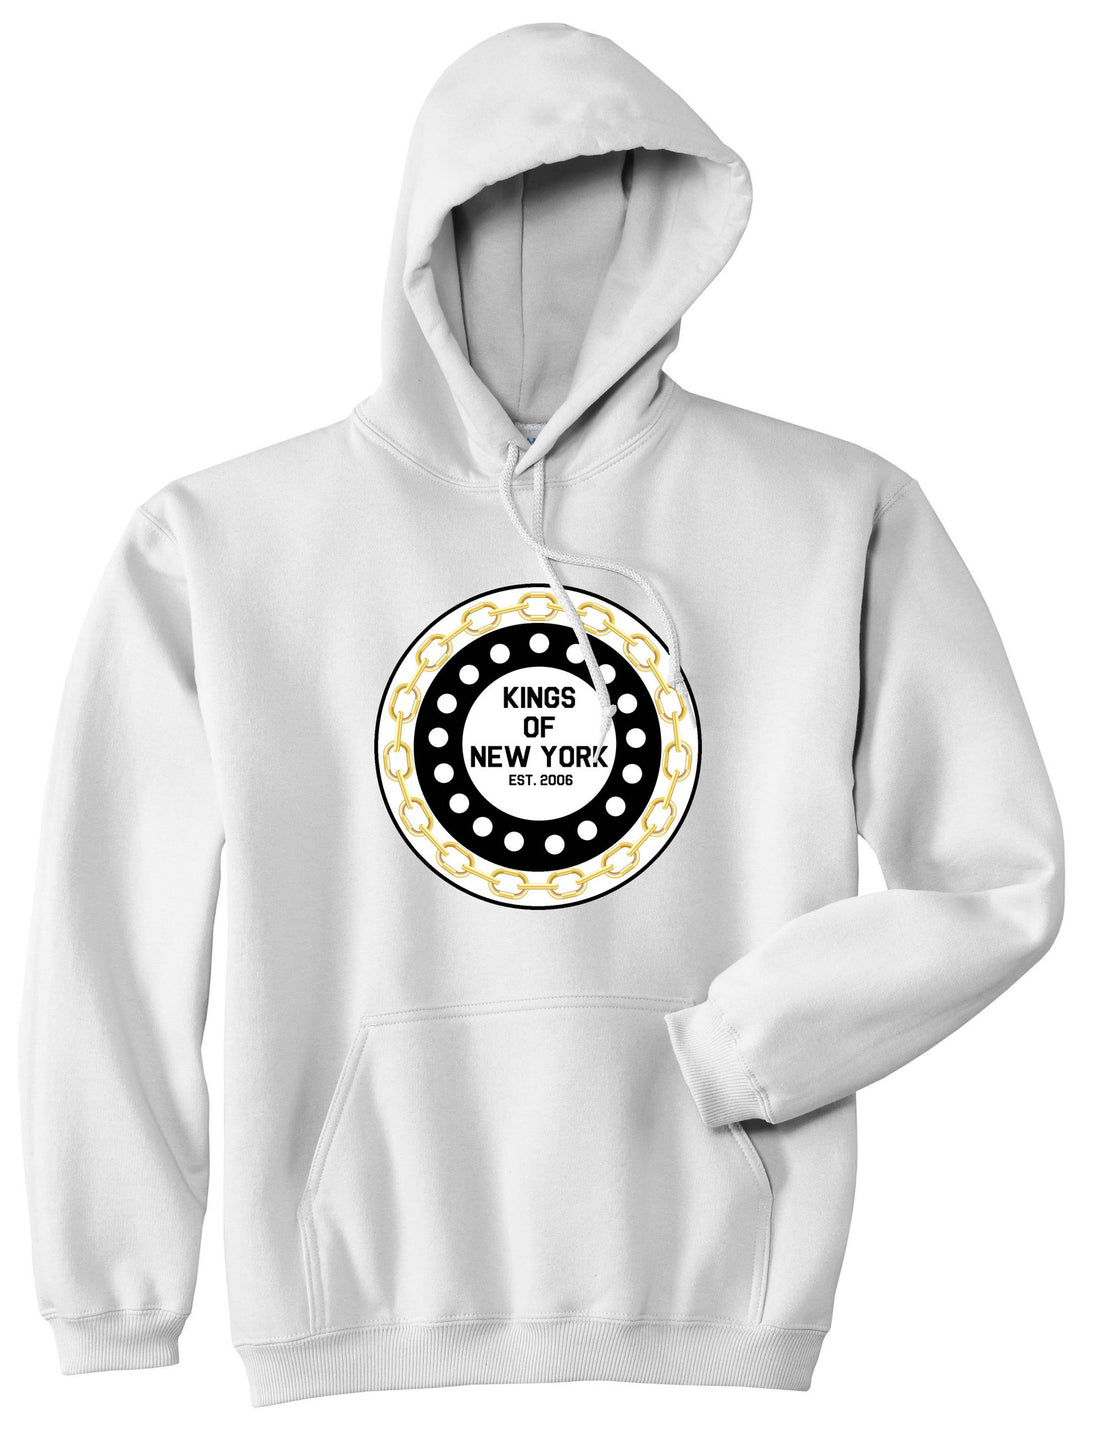 Chain Logo New York Brooklyn Bronx Boys Kids Pullover Hoodie Hoody in White by Kings Of NY